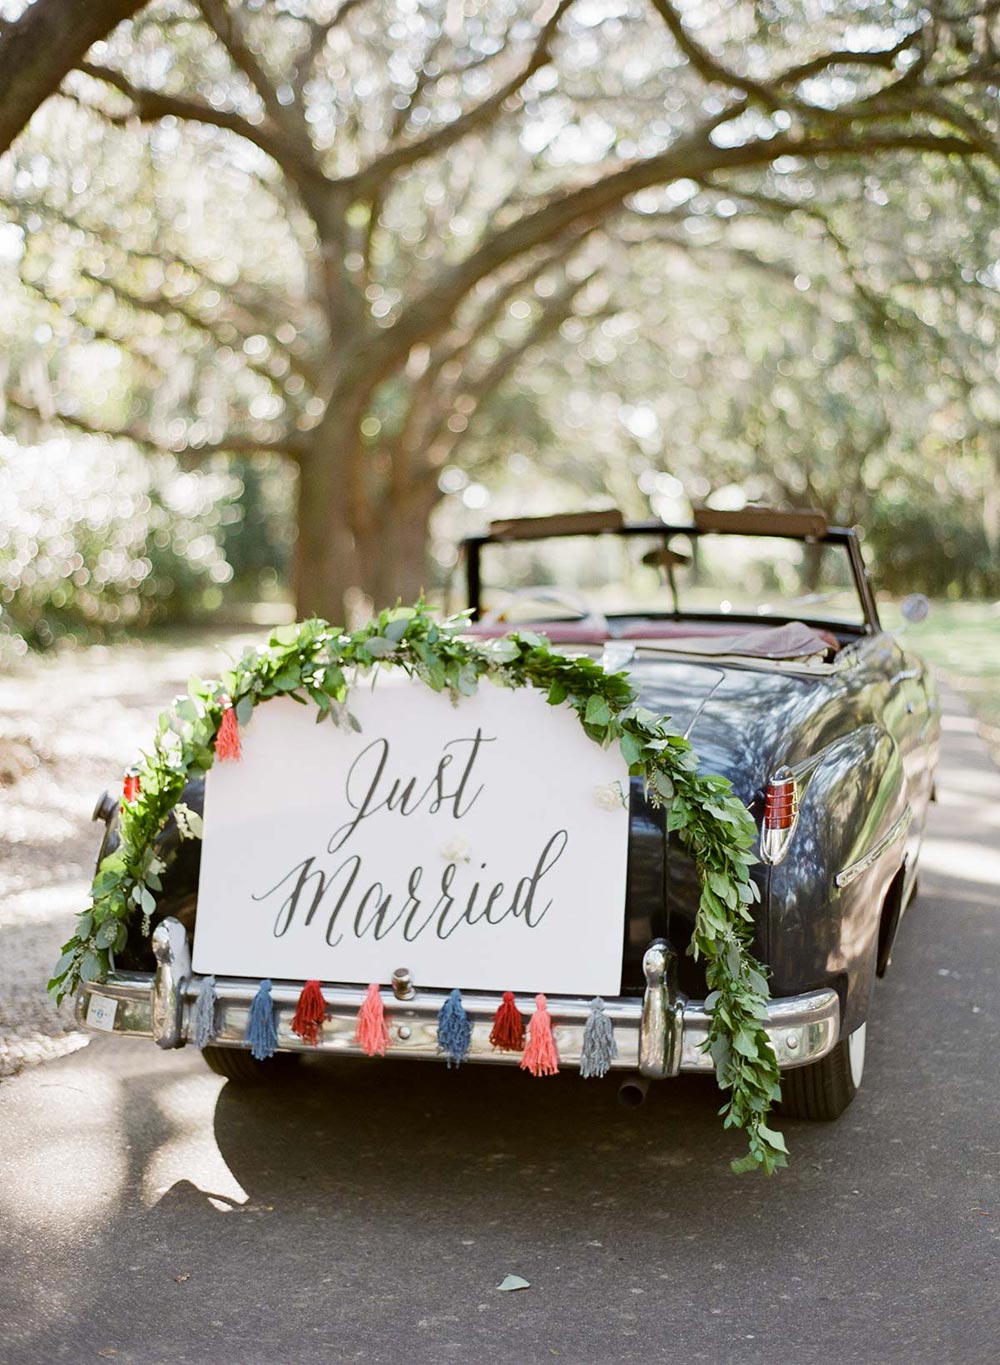 wedding getaway car with just married sign and tassel garland